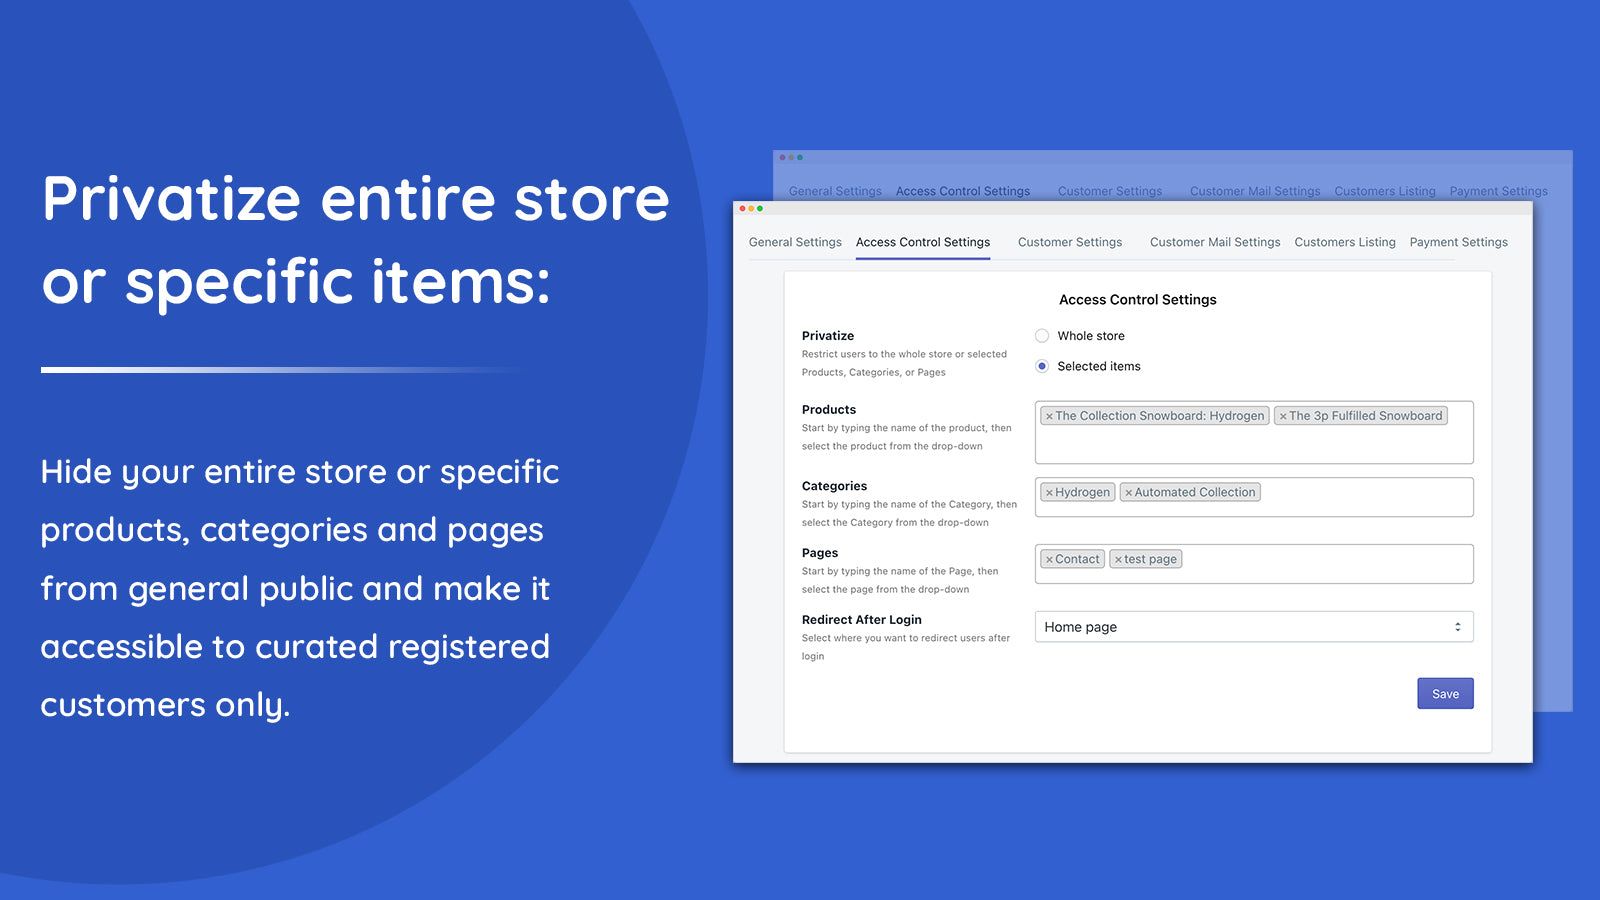 Privatize entire store or specific pages